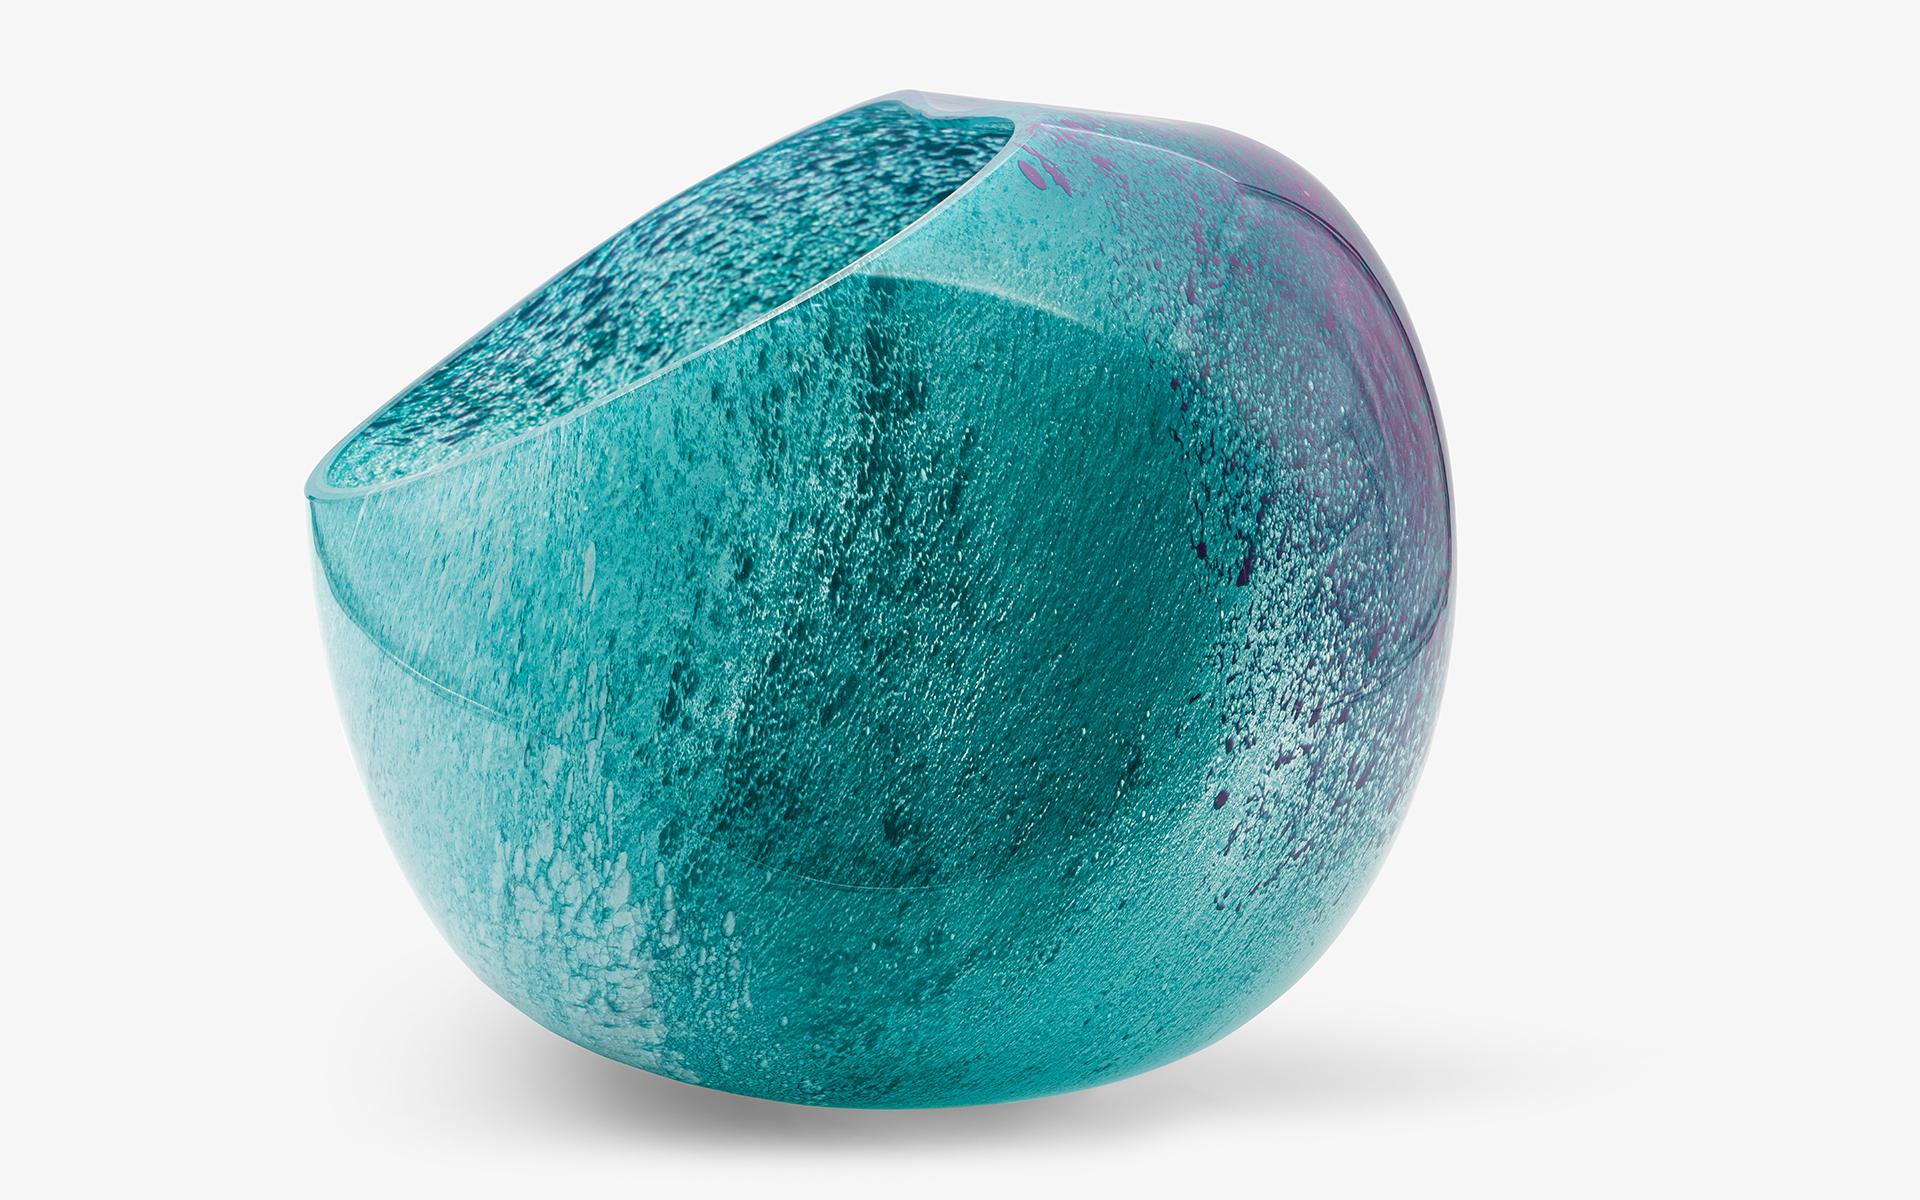 Hand-Crafted Turquoise and Lilac Color Amorphous Blown Glass Vase No:2